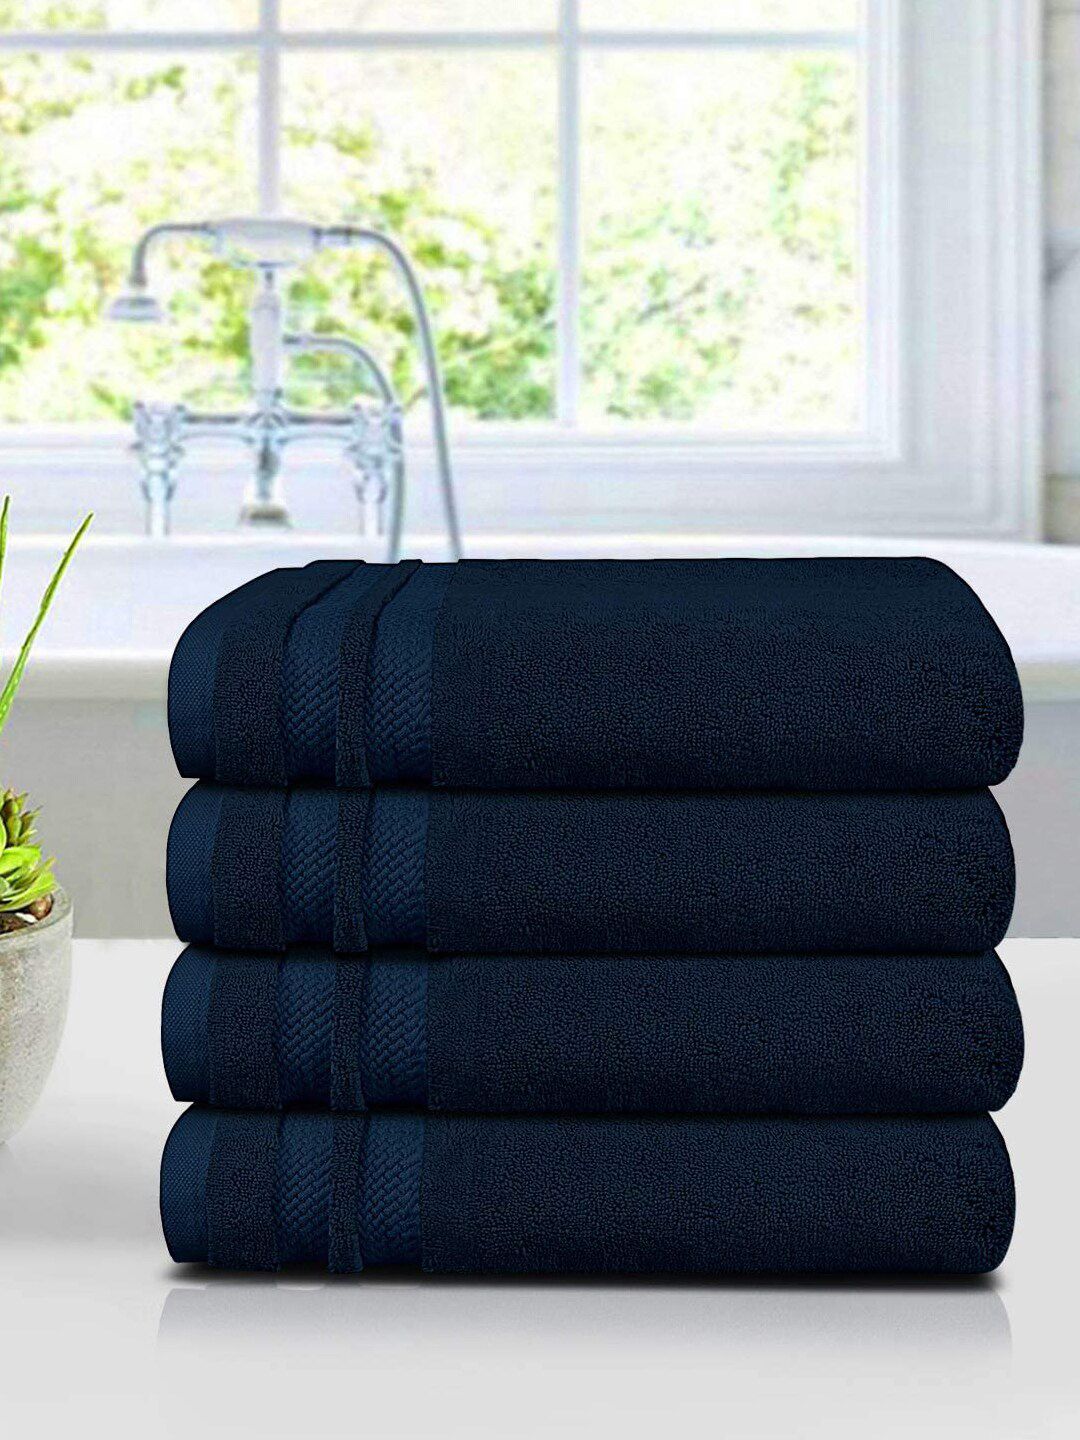 Trident 4 Piece Hand Towel Set Navy Blue Luxury Collection 100% Cotton 625 GSM Price in India